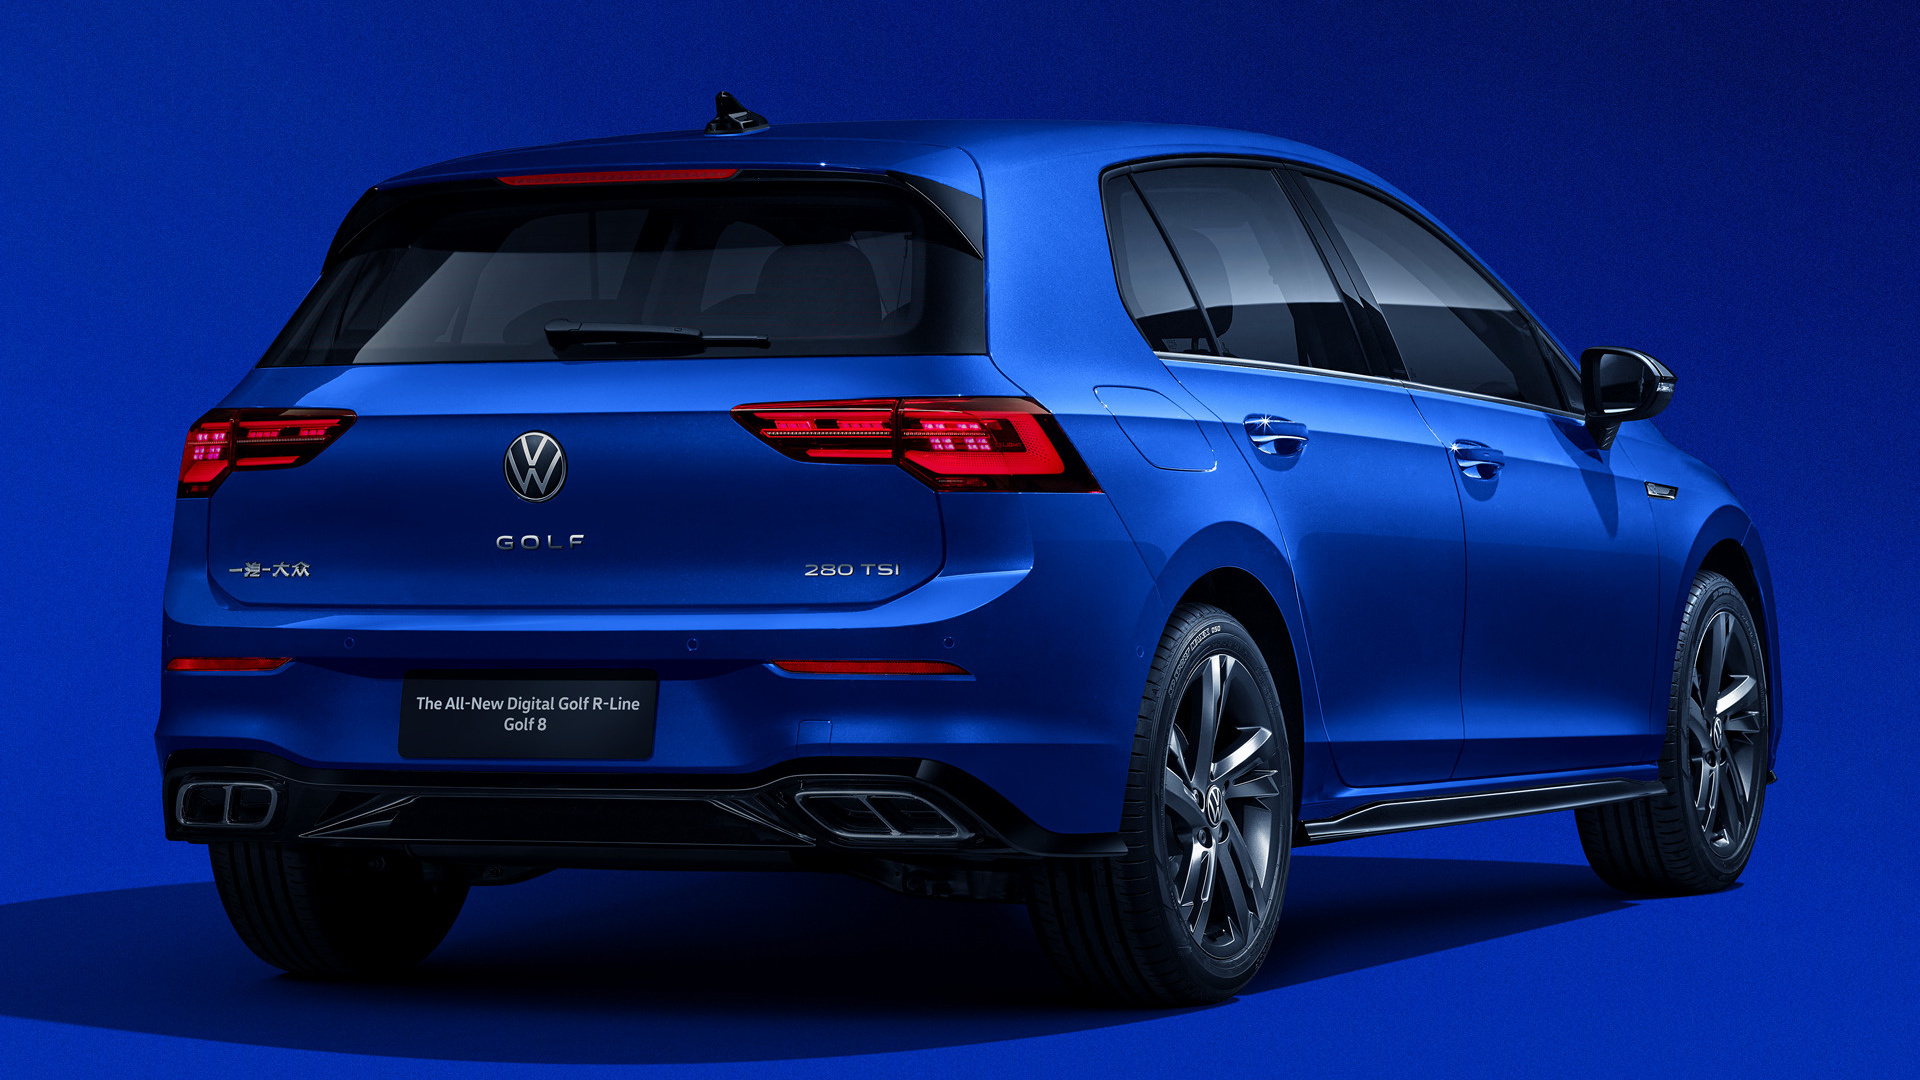 2020 Volkswagen Golf R-Line (CN) - Wallpapers and HD Images | Car Pixel